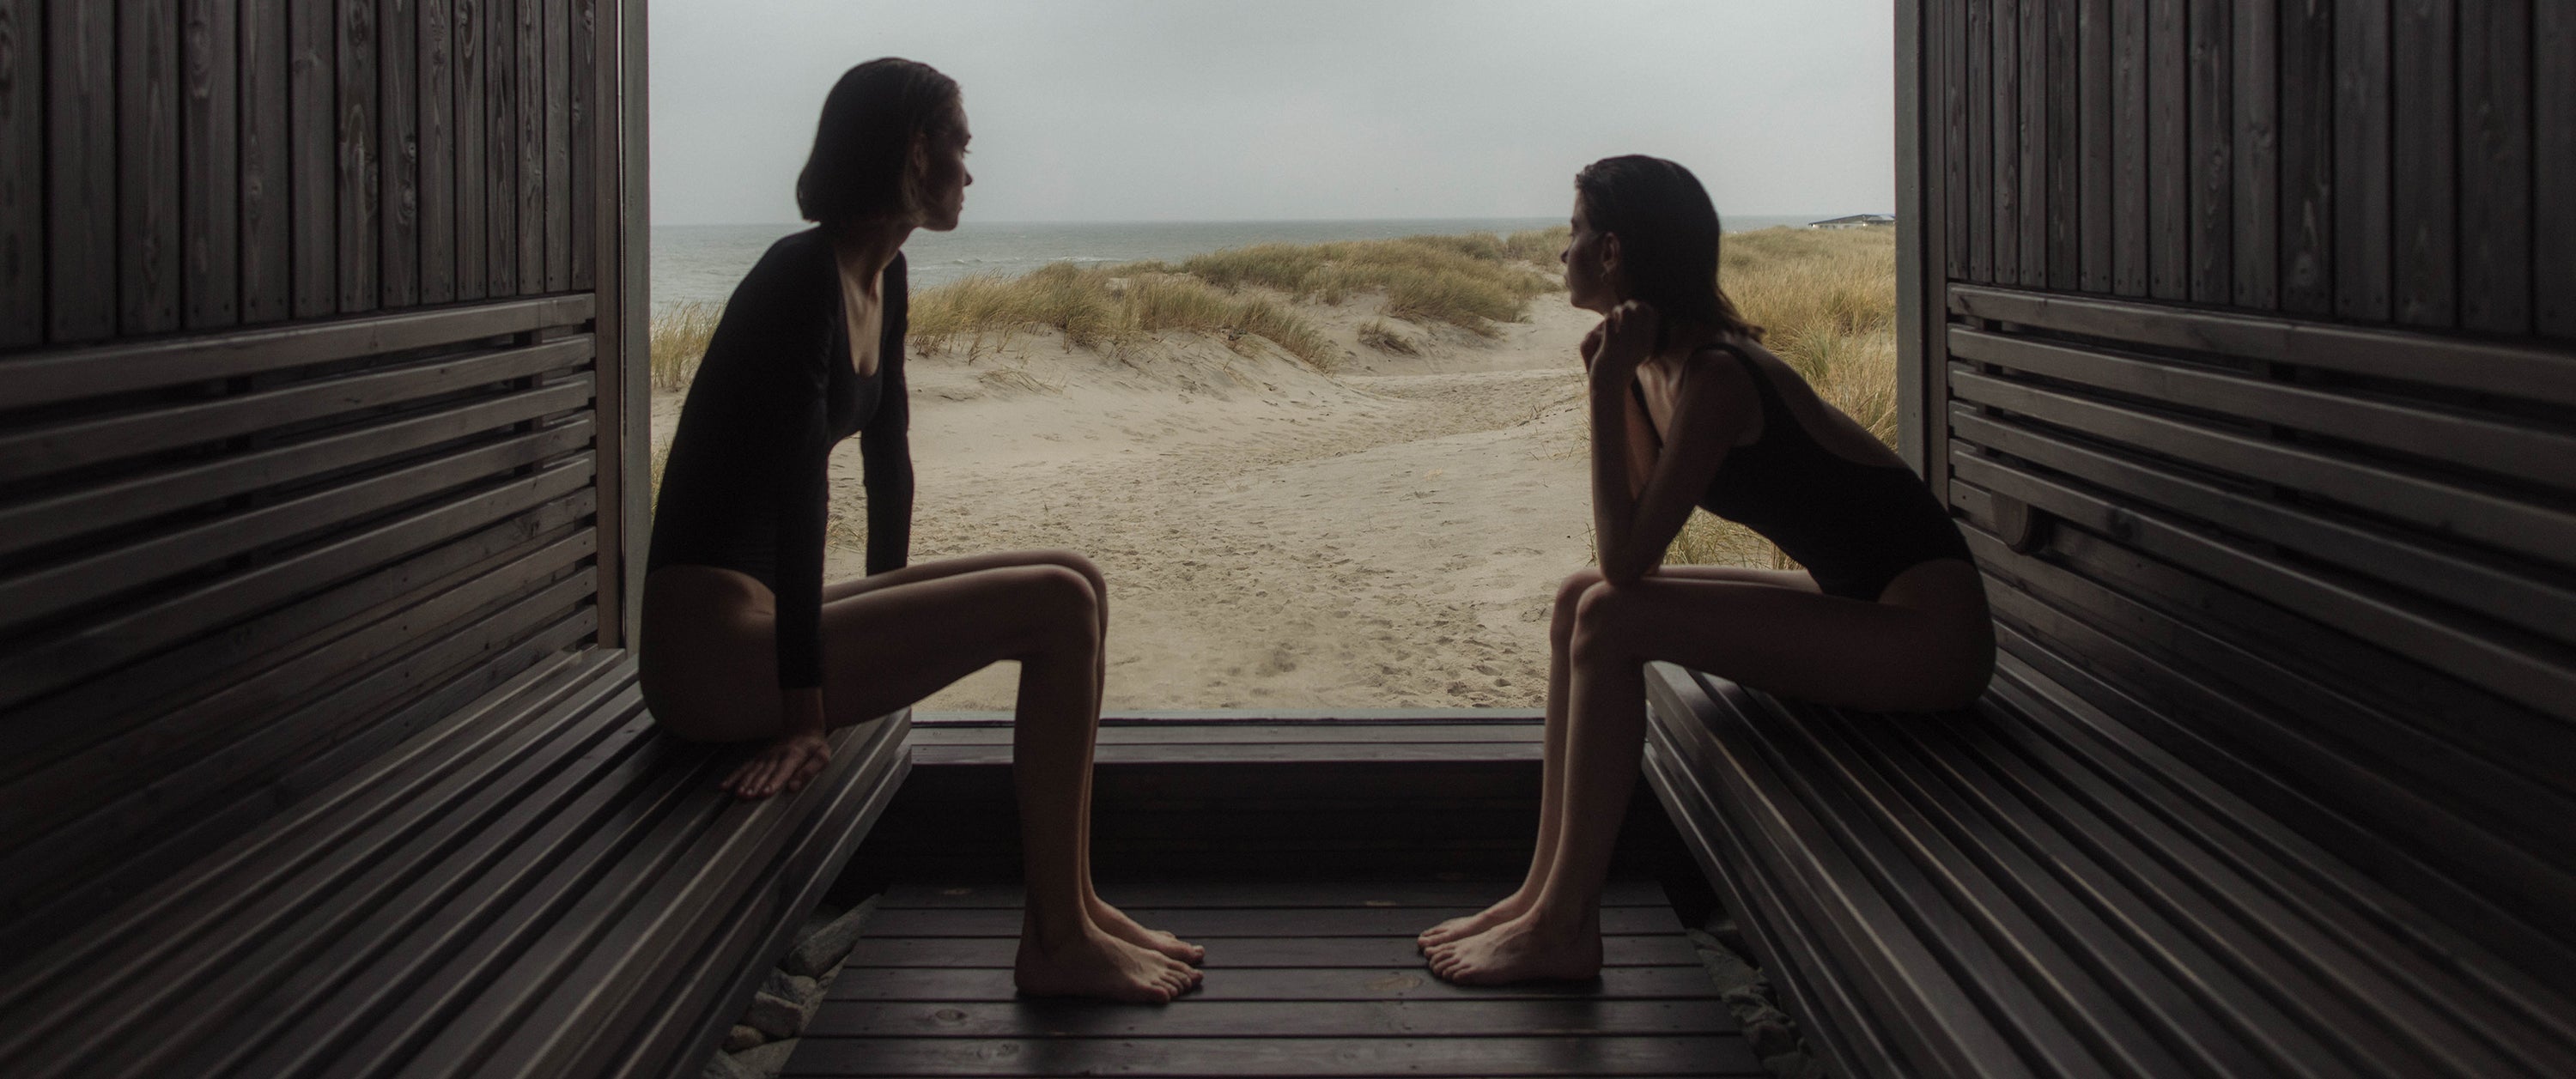 Two women sitting in a sauna and enjoying the beach view.